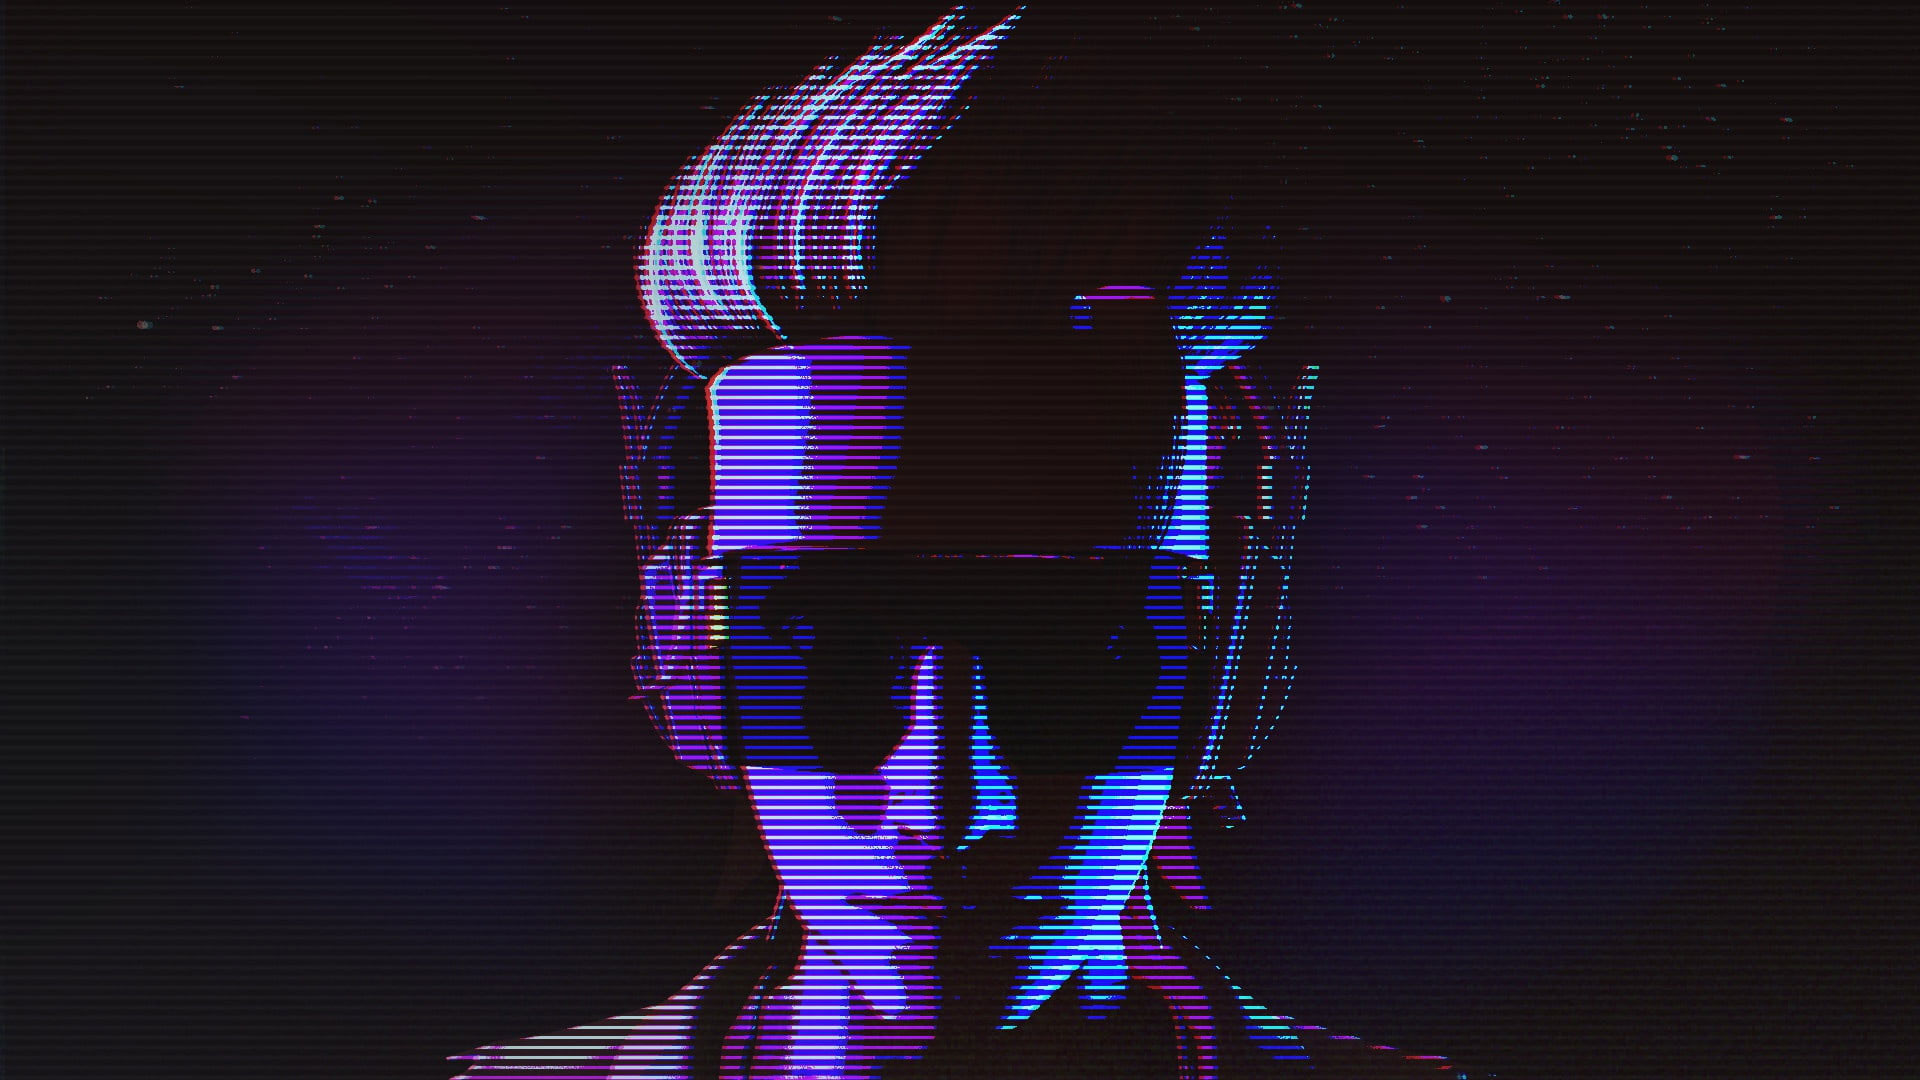 Vhs Aesthetic Wallpapers